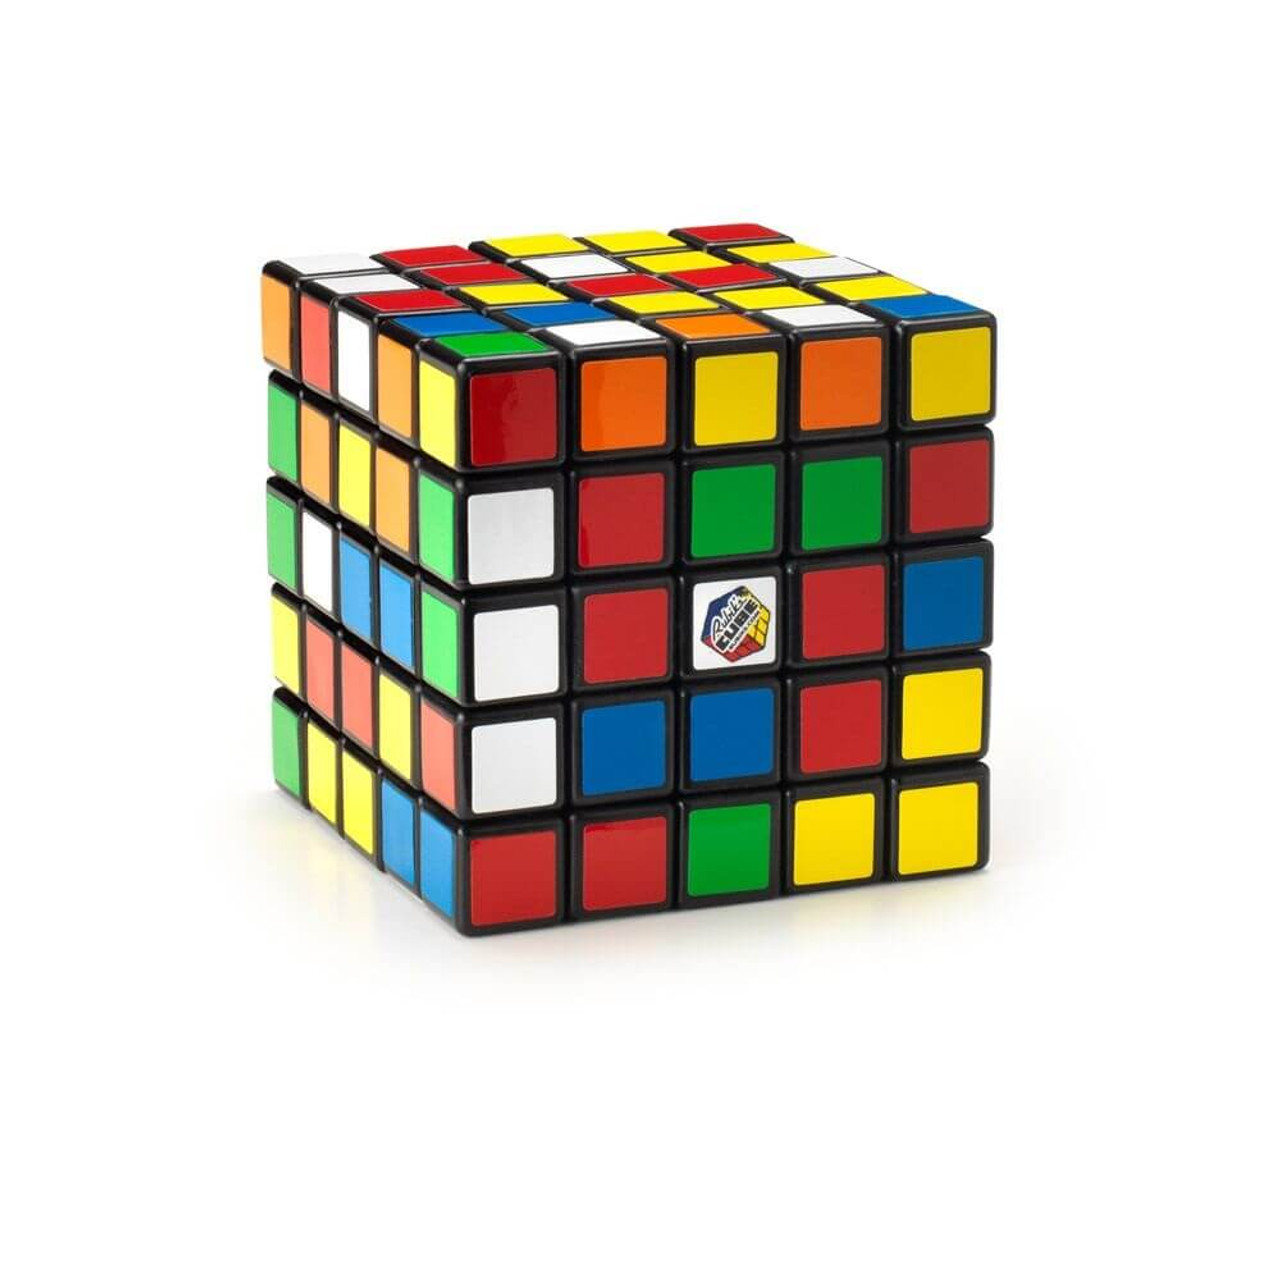 5x5x5 Rubik's Cube -How to solve the Professor's Cube